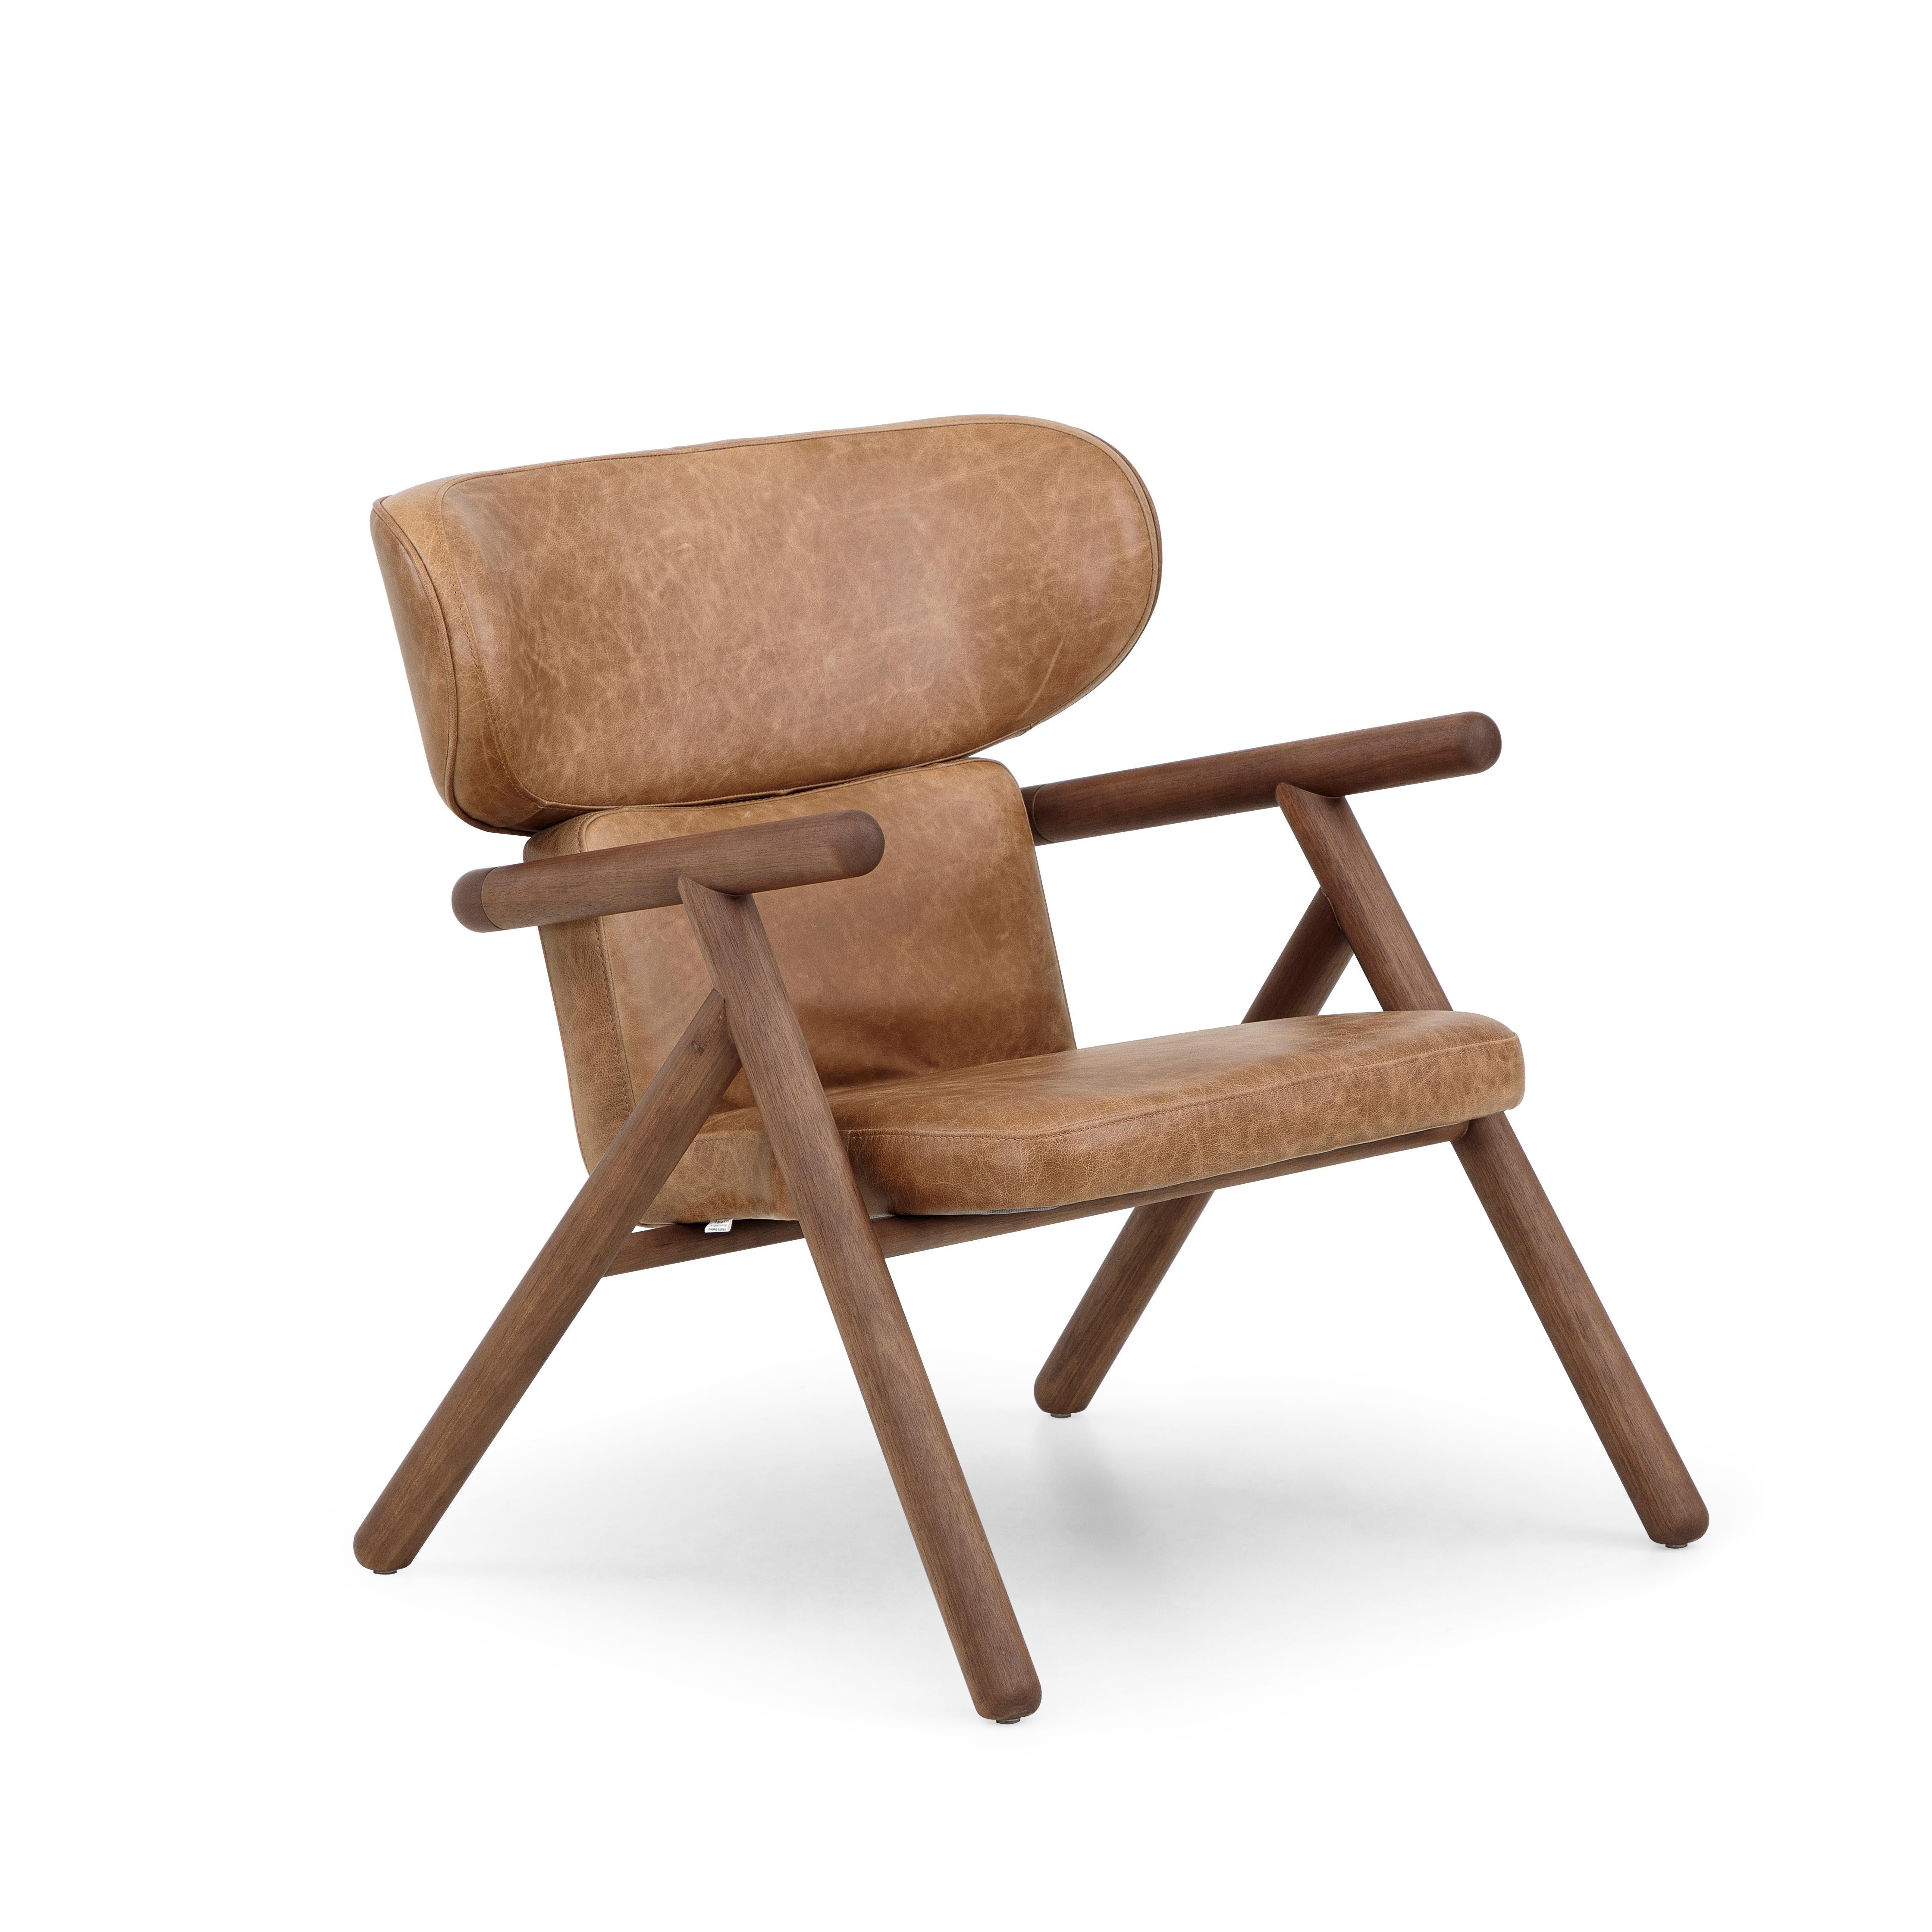 The Sole armchair is an interpretation of the Scandinavian style with a walnut wooden shell finish multi-laminated and upholstered brown leather covering the seat and back. This armchair has been designed by our Uultis team with the best foam and